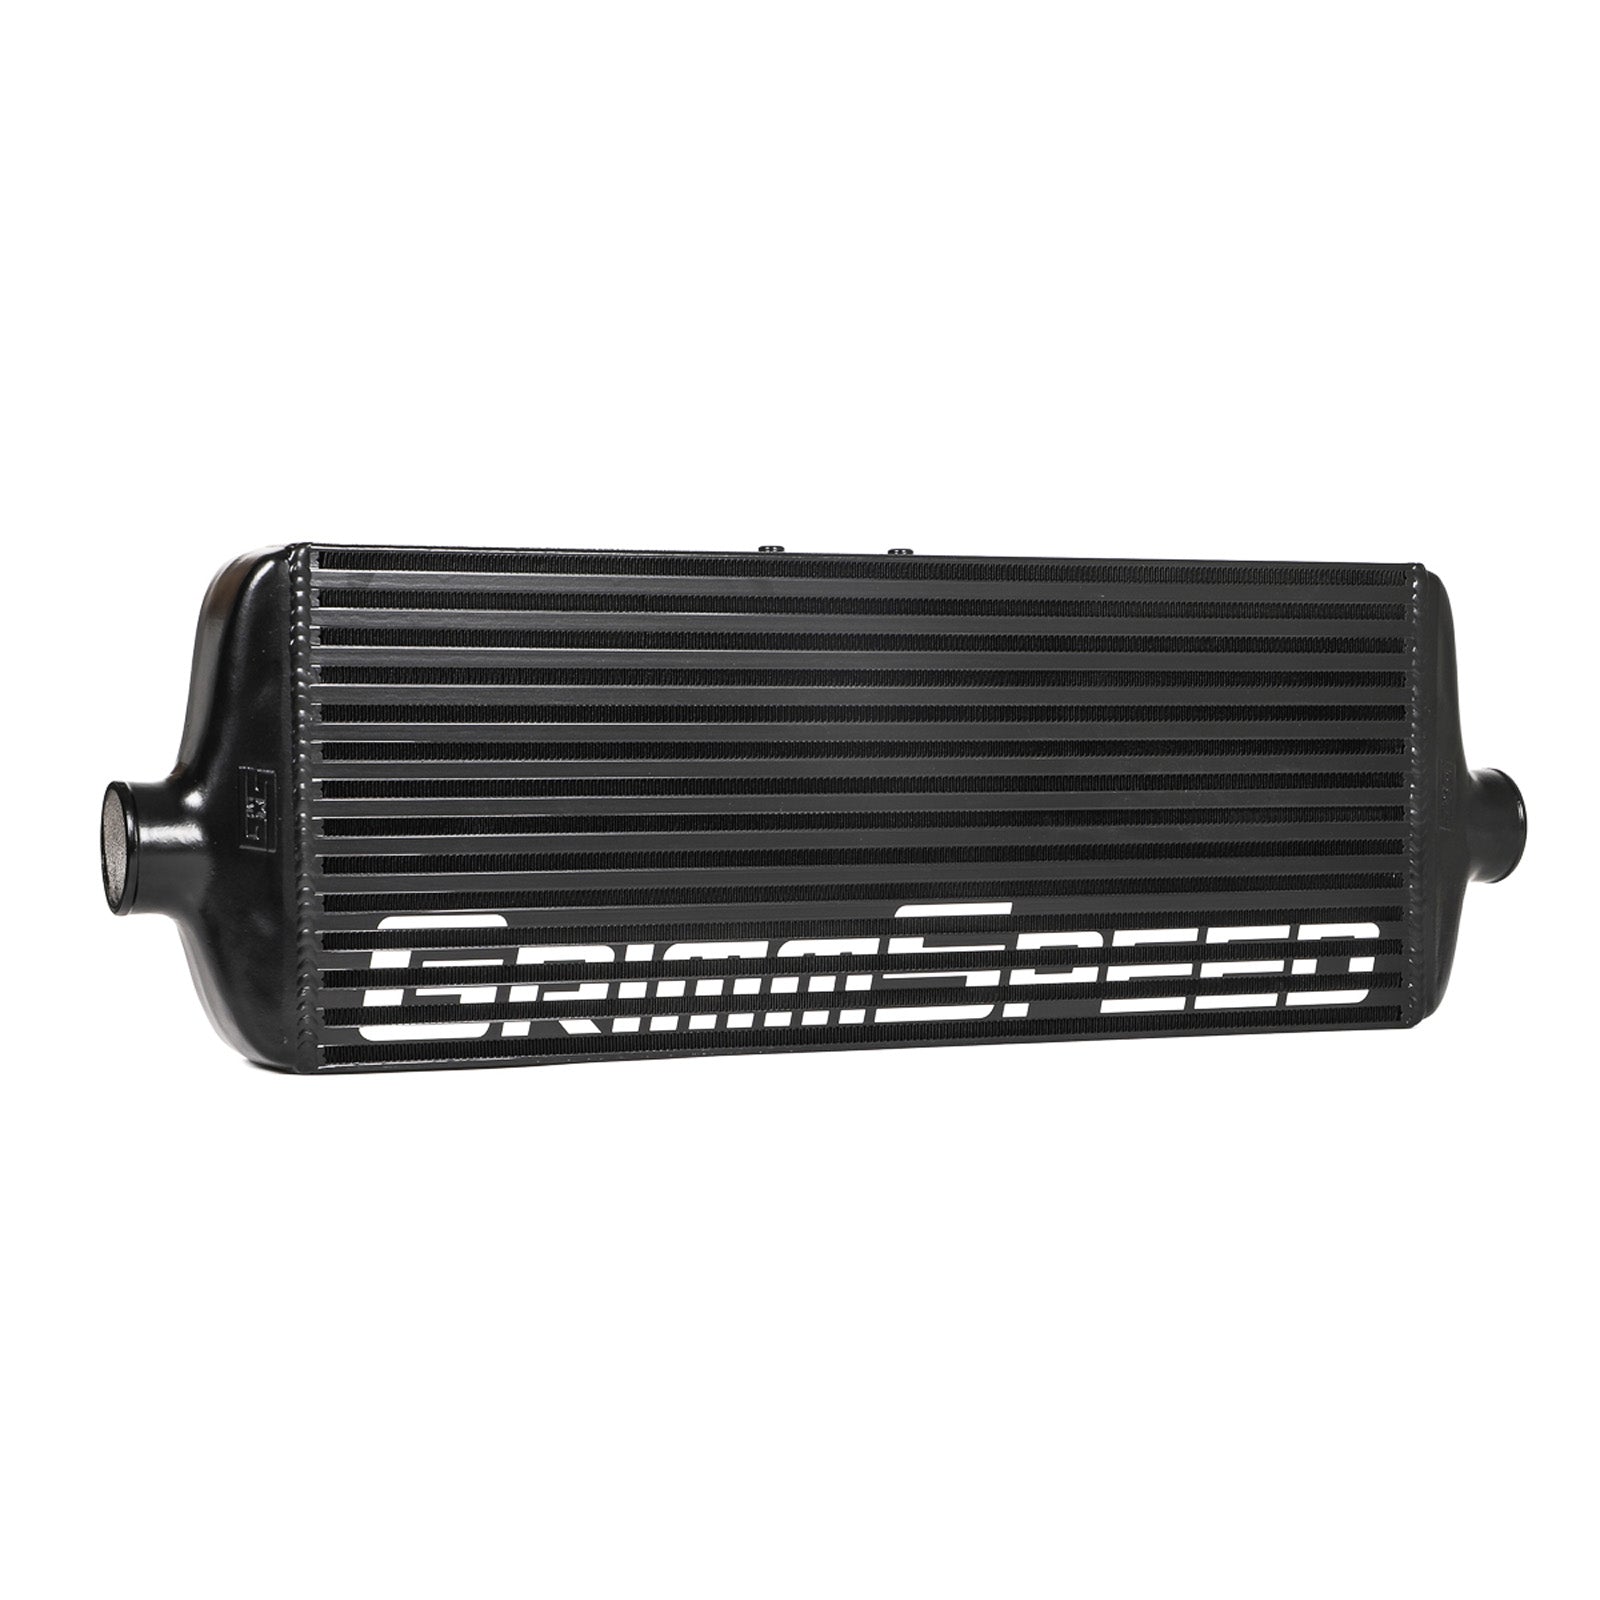 GrimmSpeed Front Mount Intercooler Kit - Black Core with Red Piping - 2015-21 Subaru STI